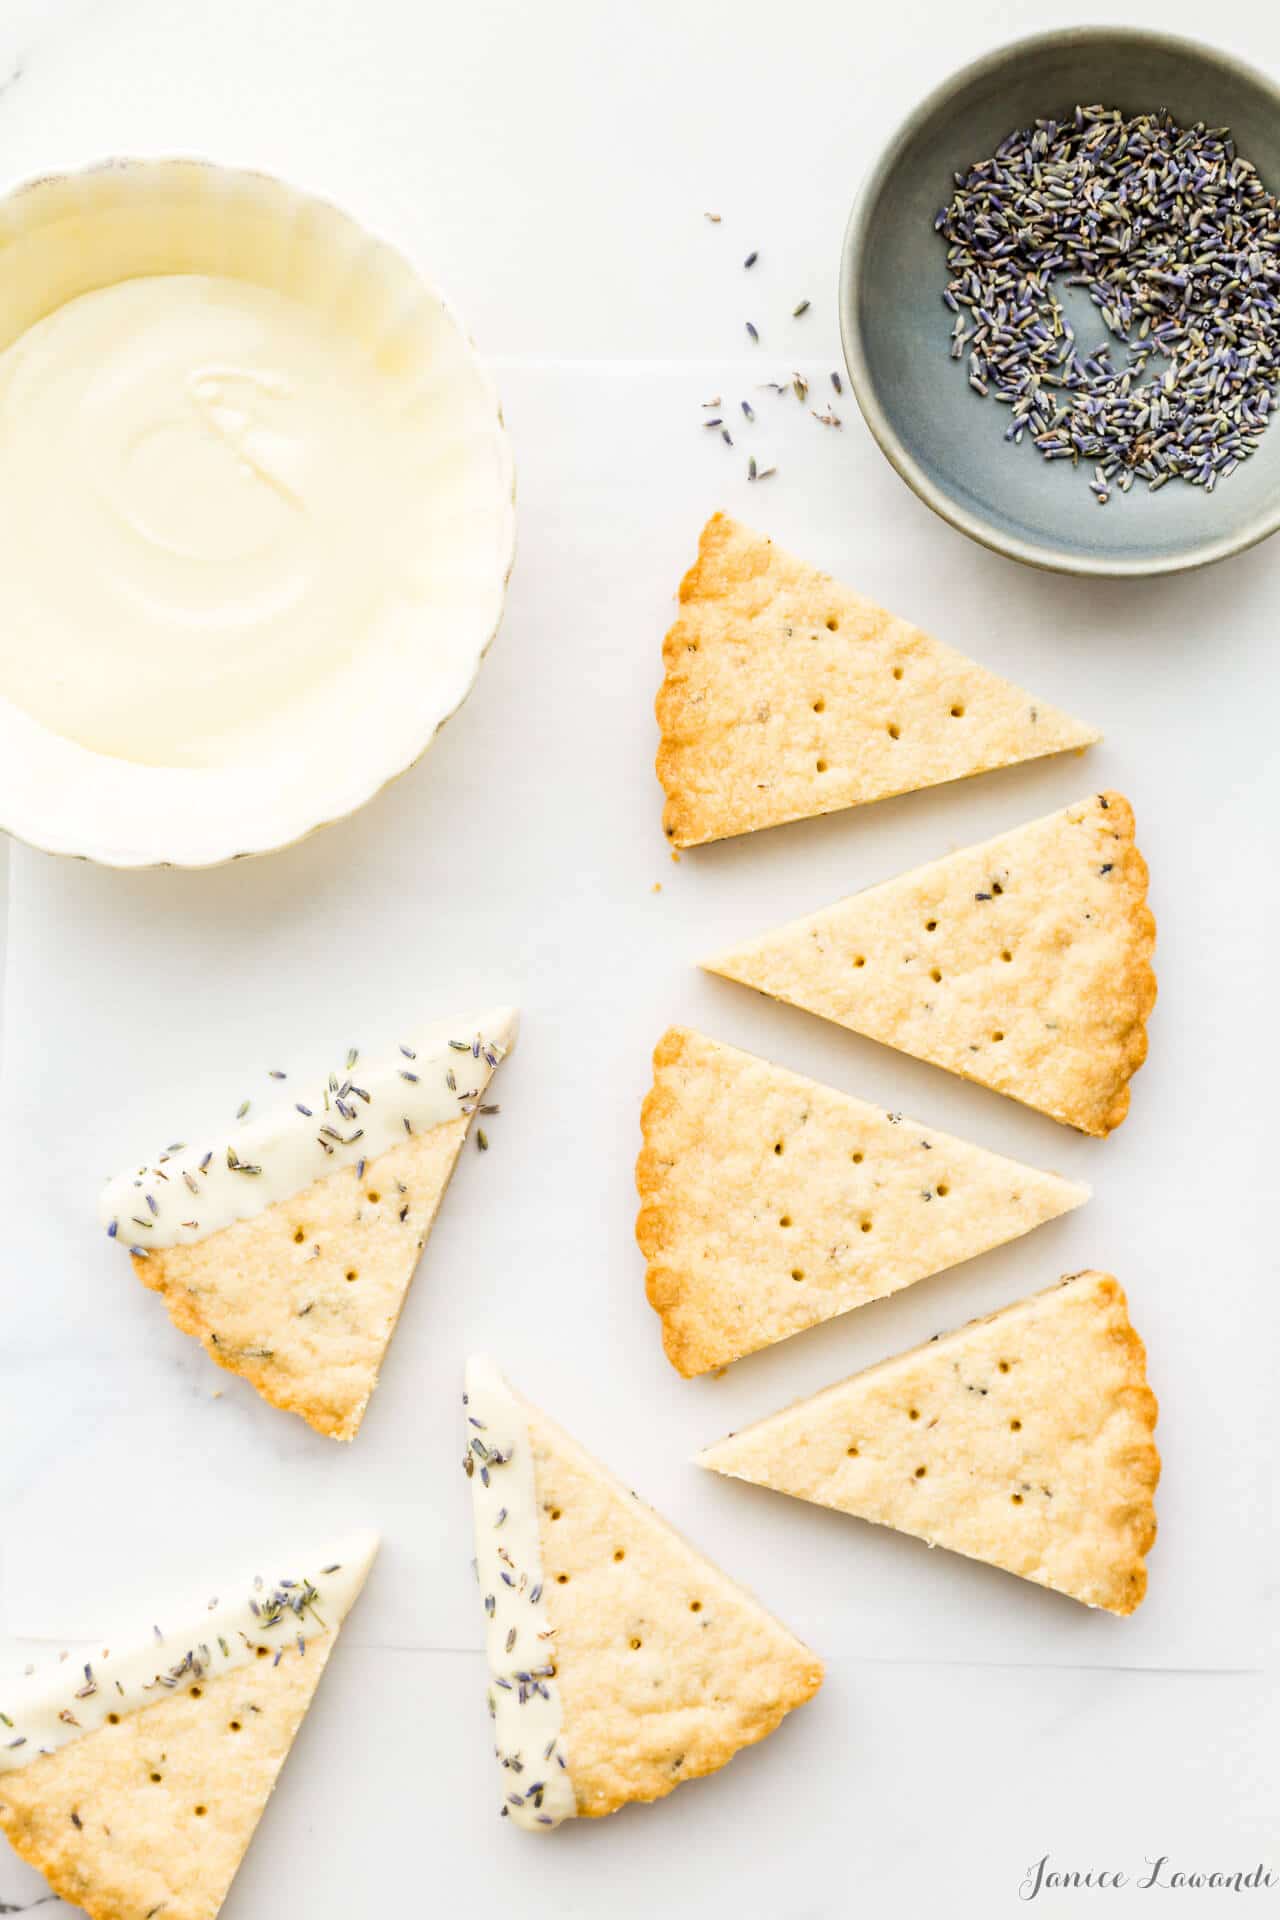 Lavender shortbread cookies dipped in a pale yellow bowl of white chocolate with a stoneware bowl of lavender